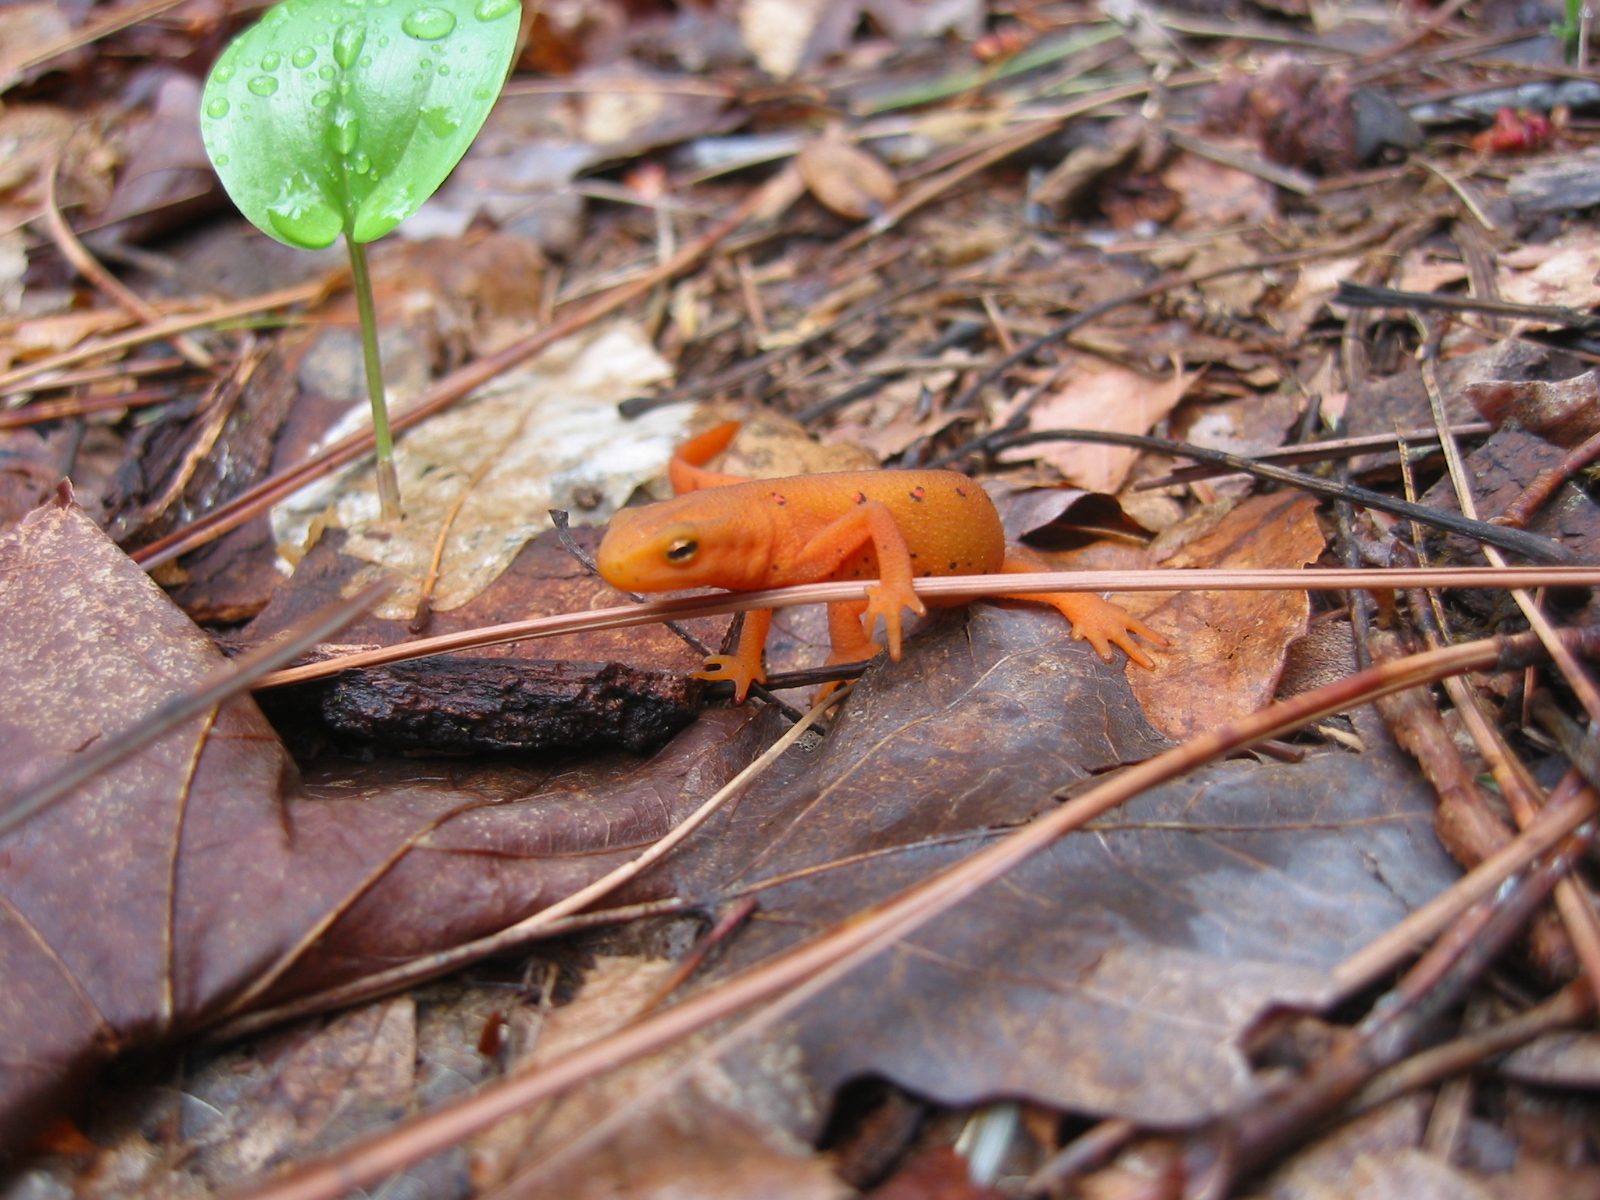 Red eft (tiny orange salamander) climbing over a single brown pine needle on a forest floor.